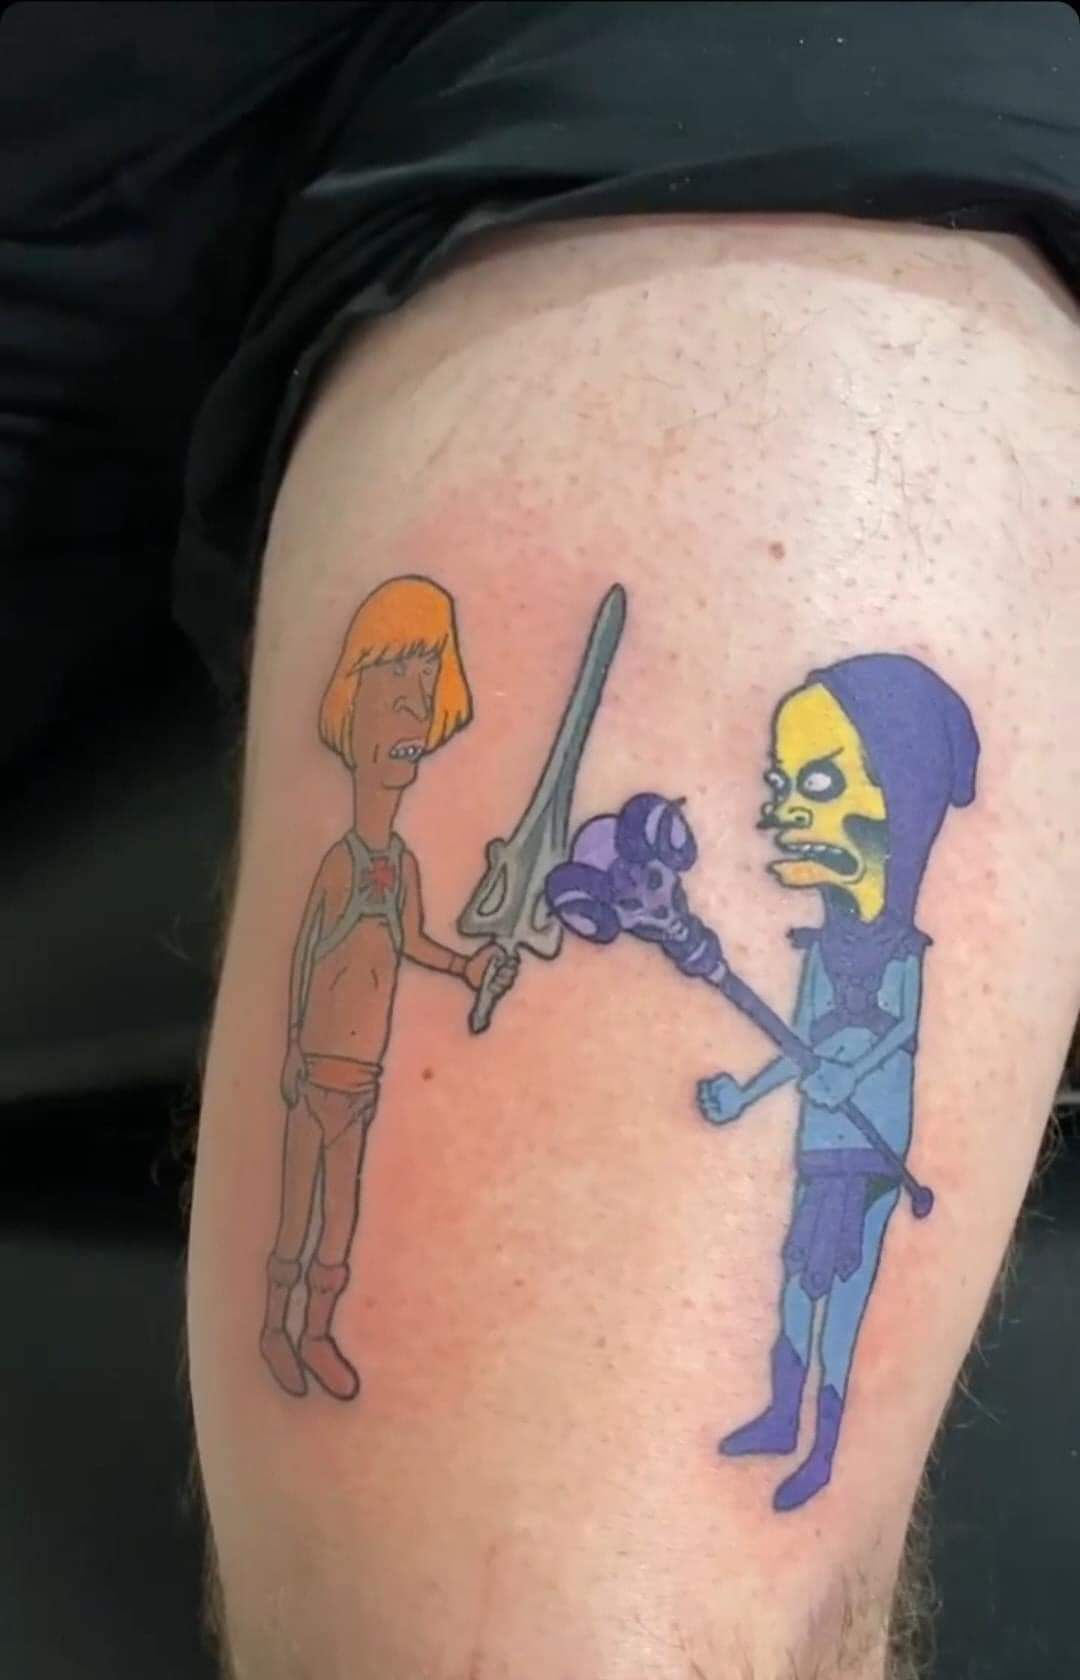 This Beavis and Butthead tattoo